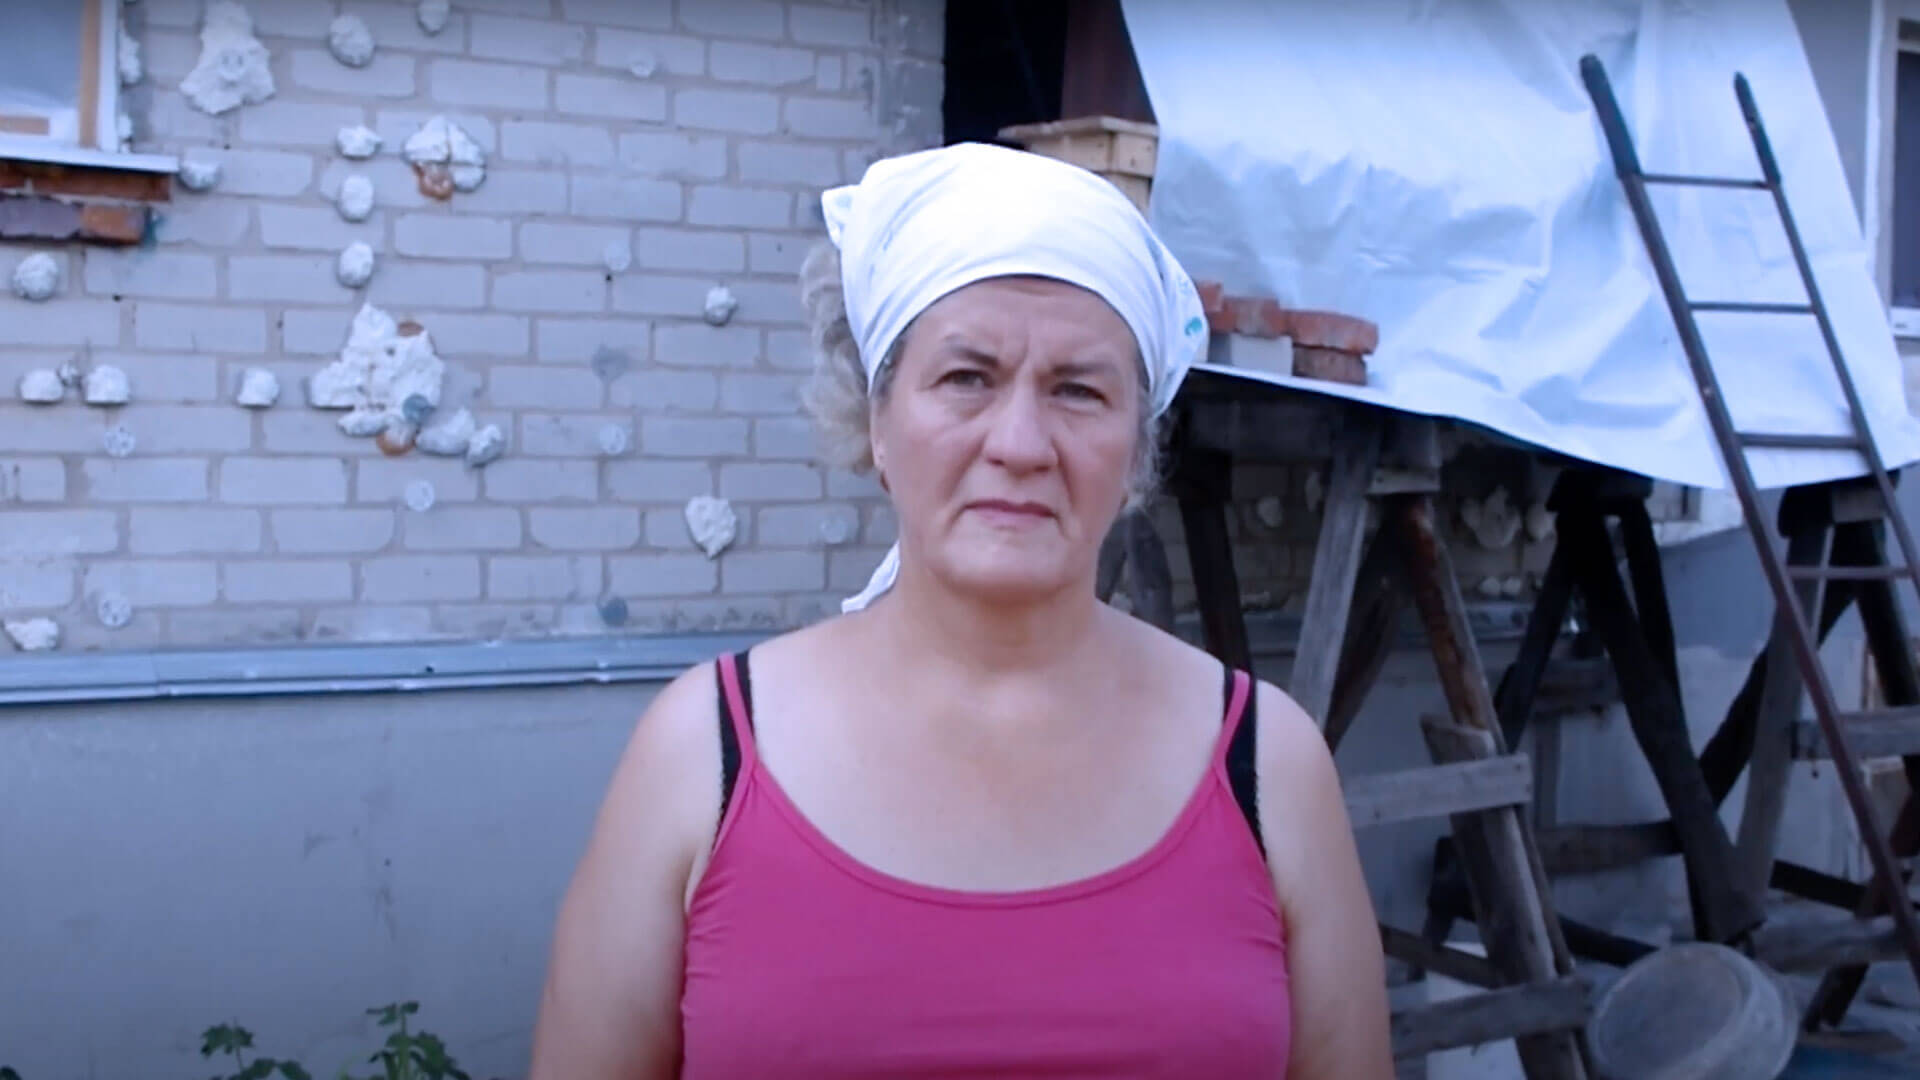 Woman in headscarf stands outside her damaged home in Ukraine